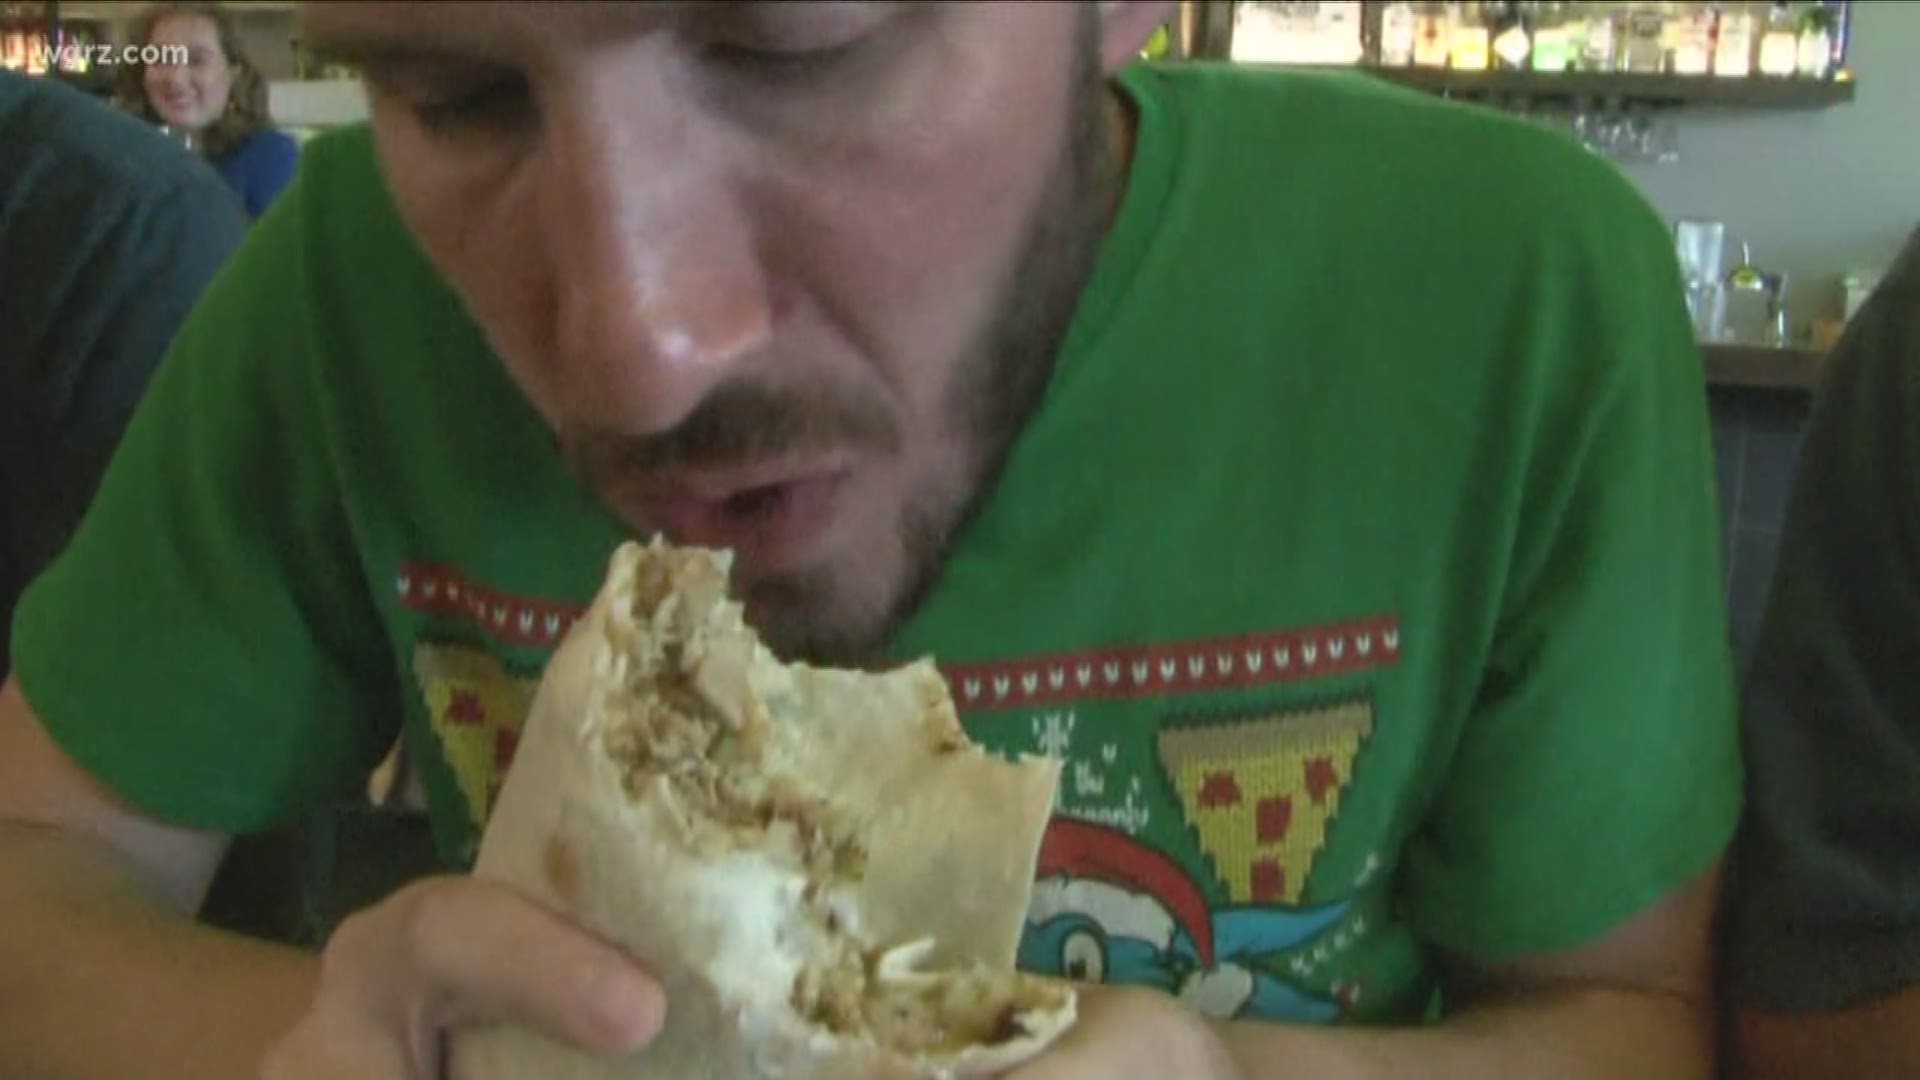 2nd annual burrito eating contest at Lloyds